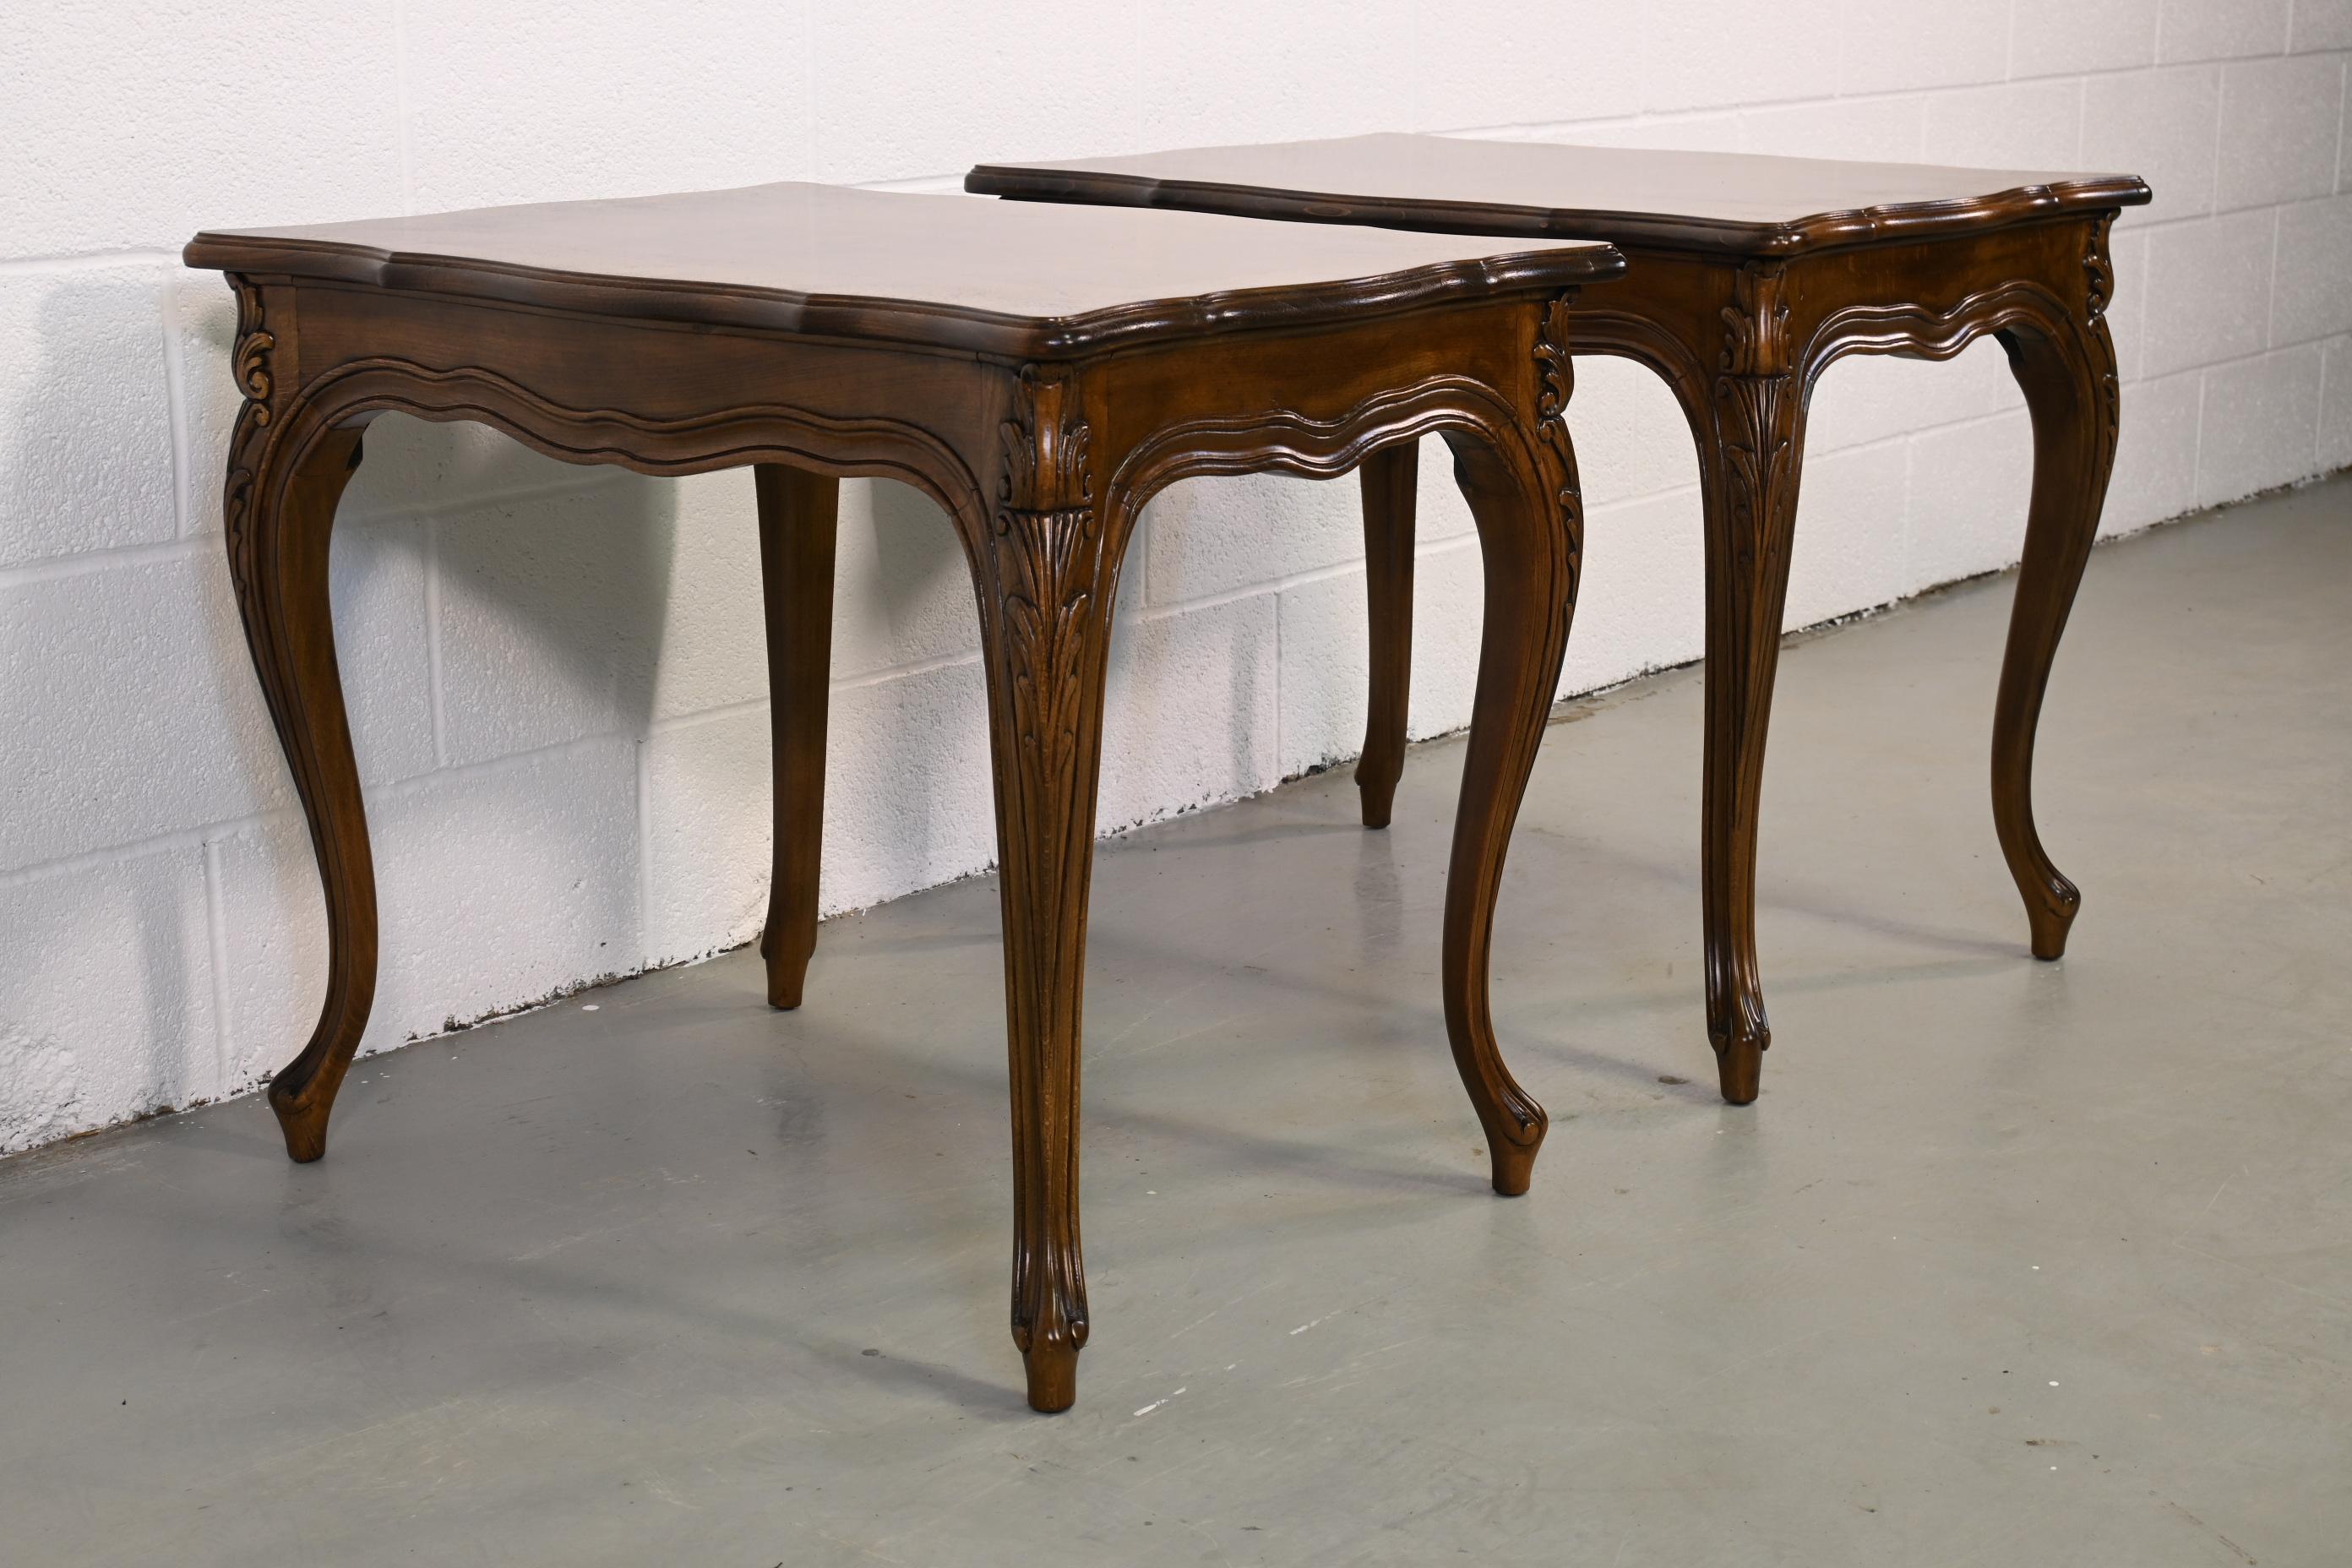 Lacquered Karges Furniture French Provincial Burled Walnut End Tables - a Pair For Sale